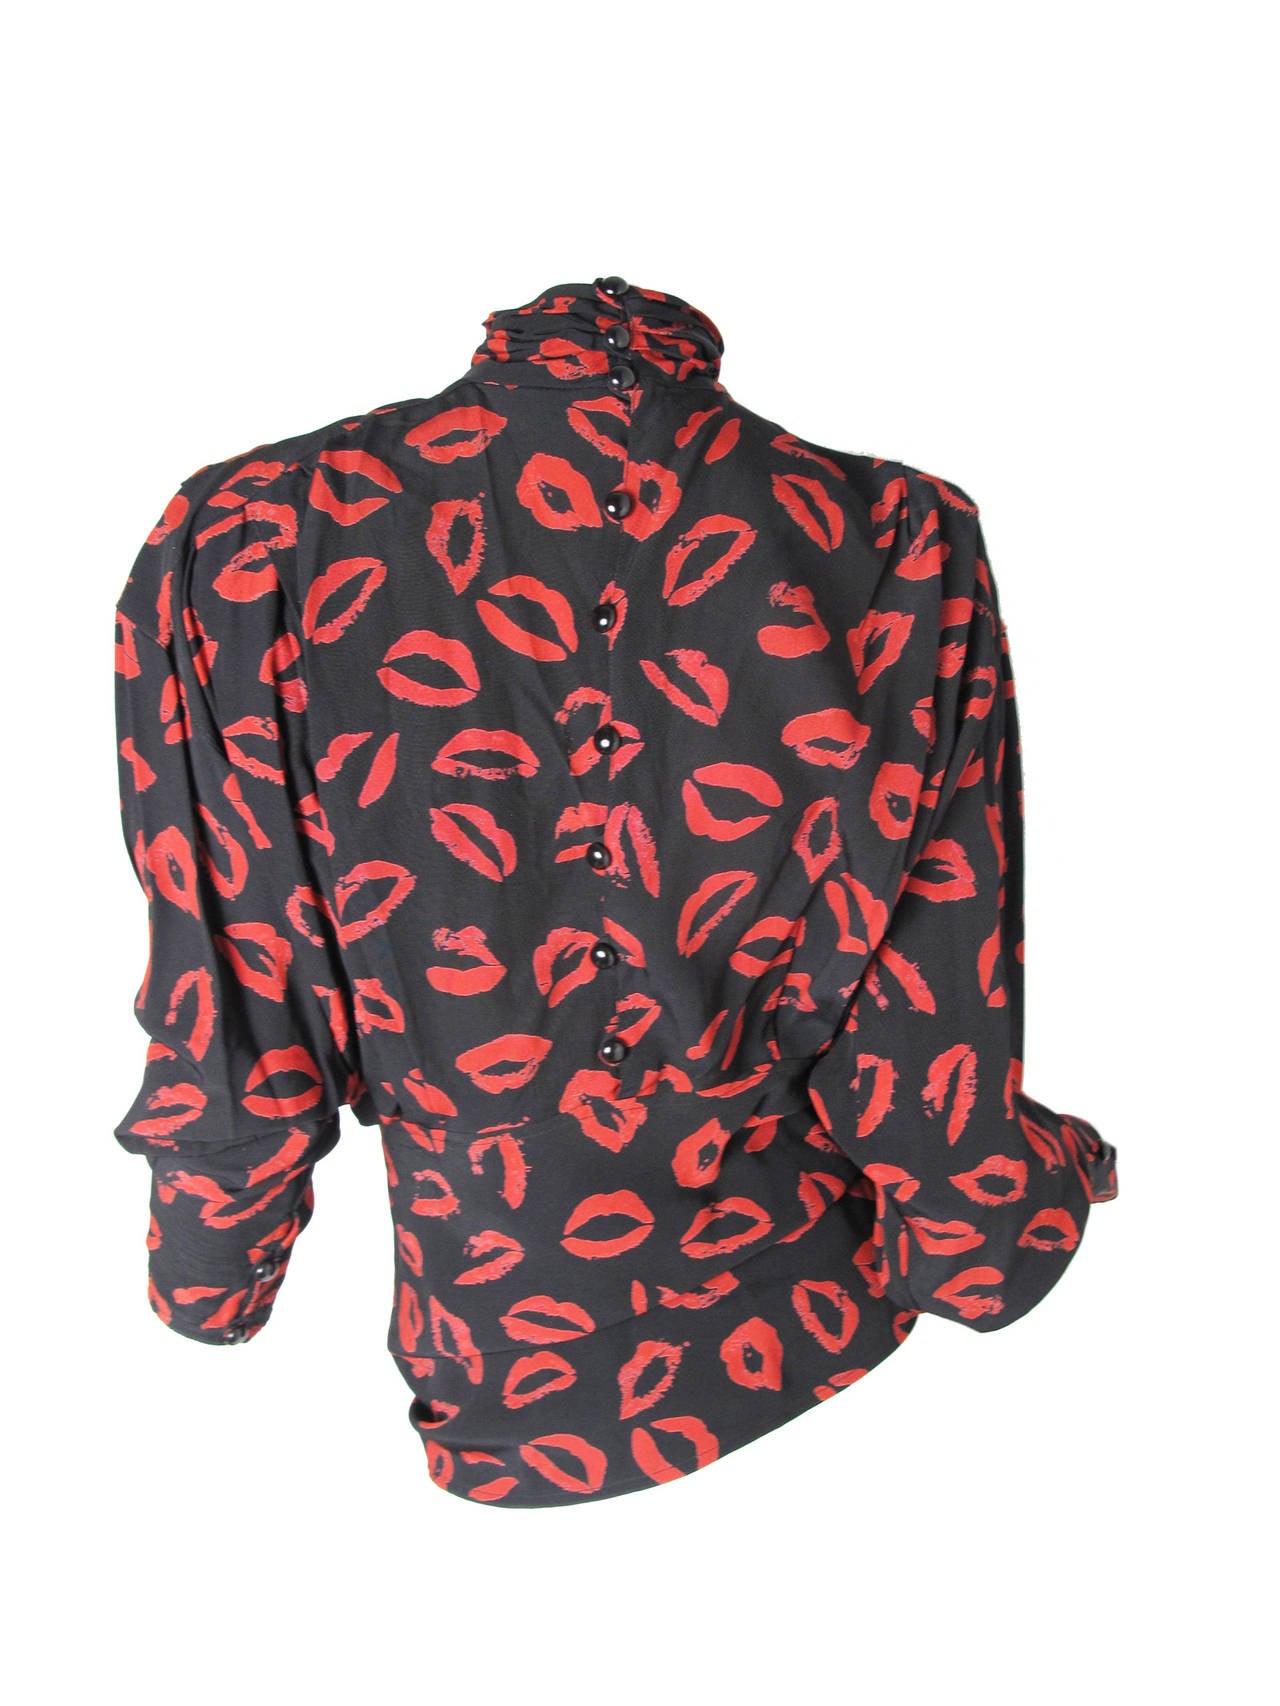 UNGARO viscose black and red lips print blouse with tie at waist. Shoulder pads can be removed. 46